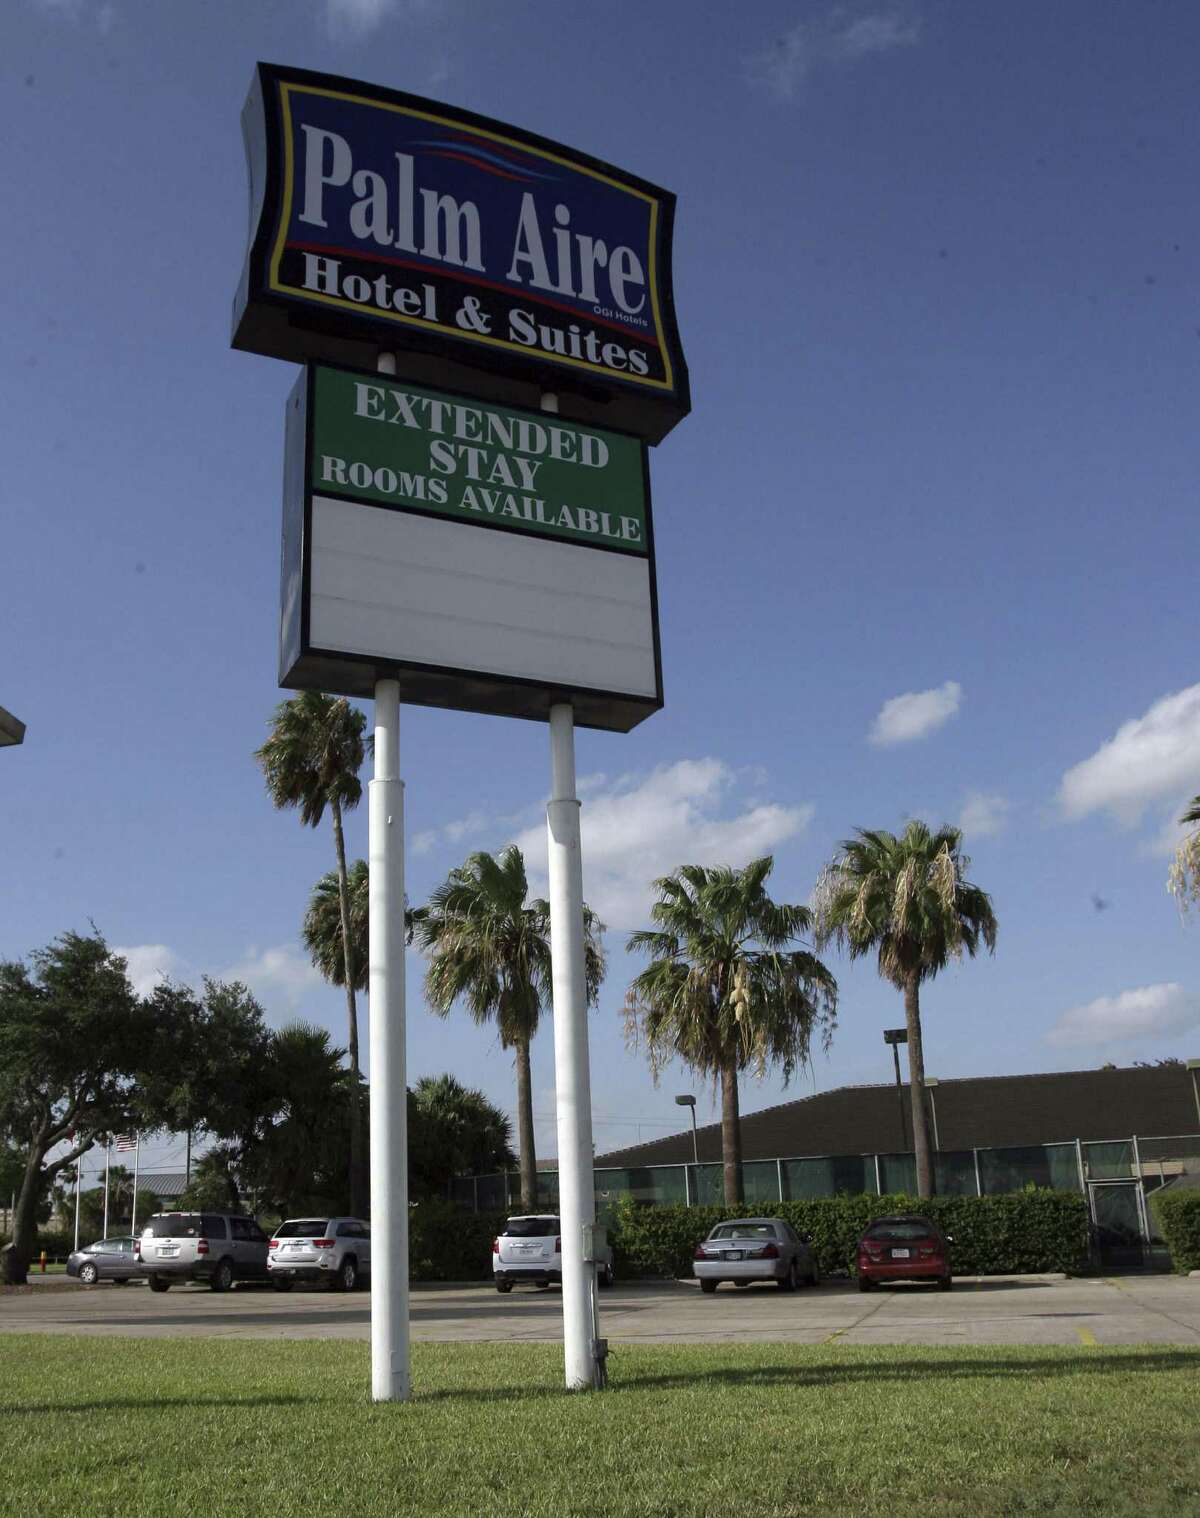 The hotel in Weslaco, which is open and taking reservations, is listed for sale for $4 million on a website.